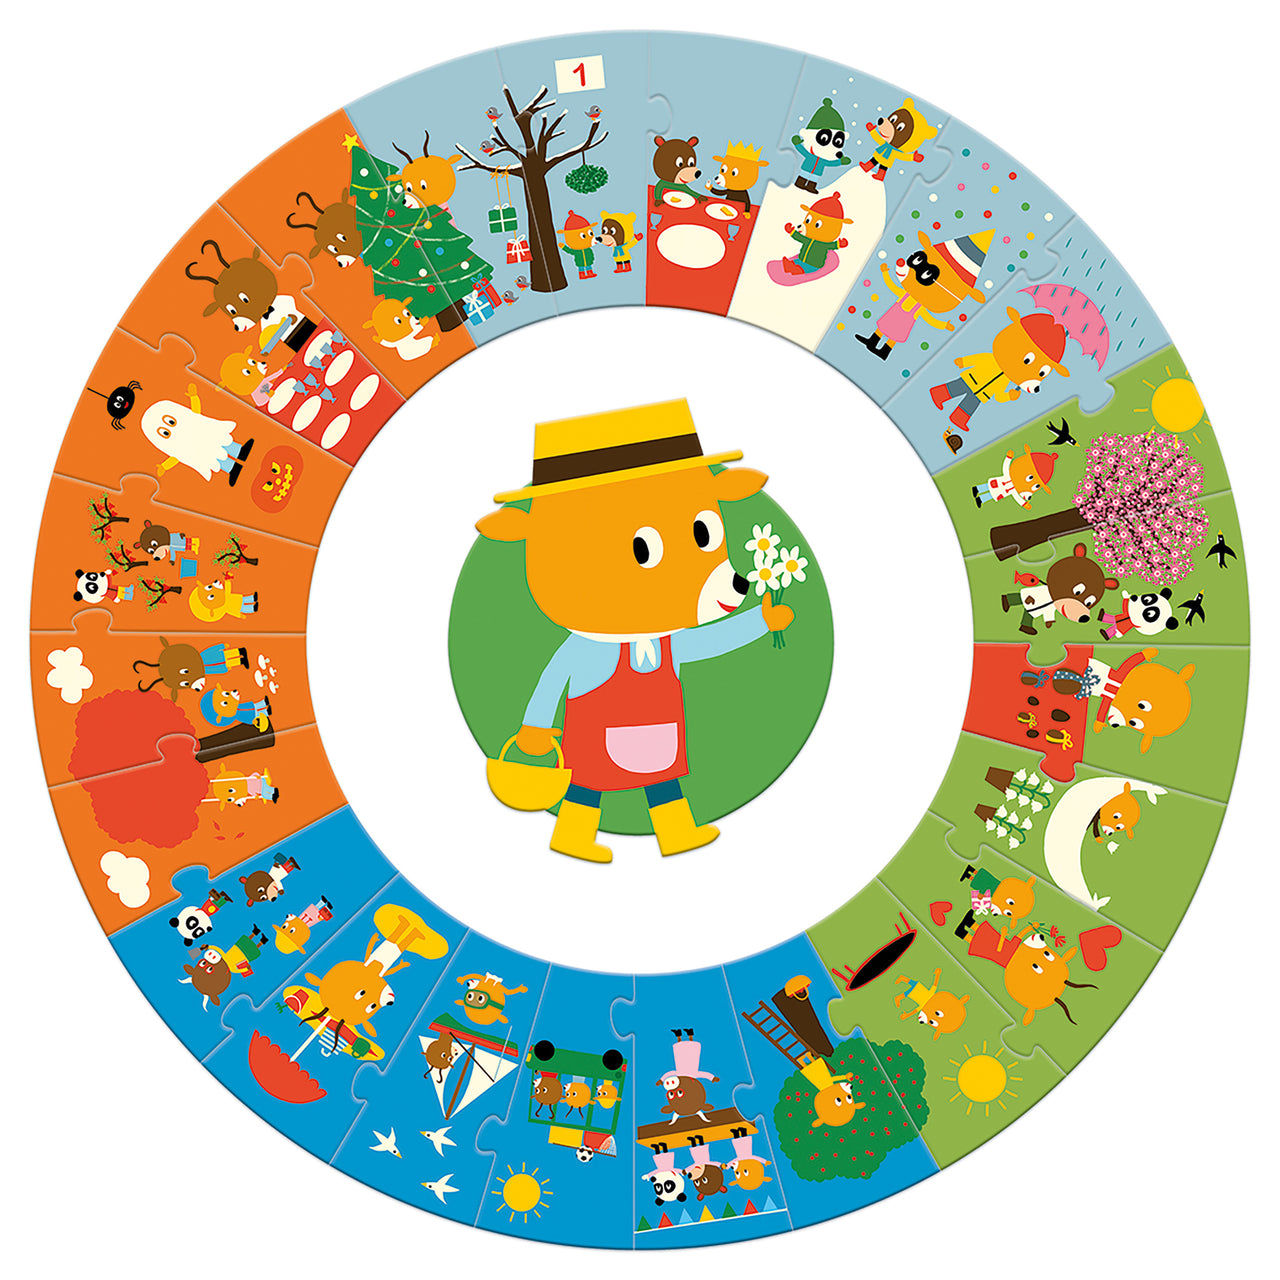 The giant "The Year" jigsaw is a circular puzzle of 24 pieces to help children visualise the cycle of a year. A colourful stroll through the 12 months to see the transformation of nature and to identify the different annual festivals. 